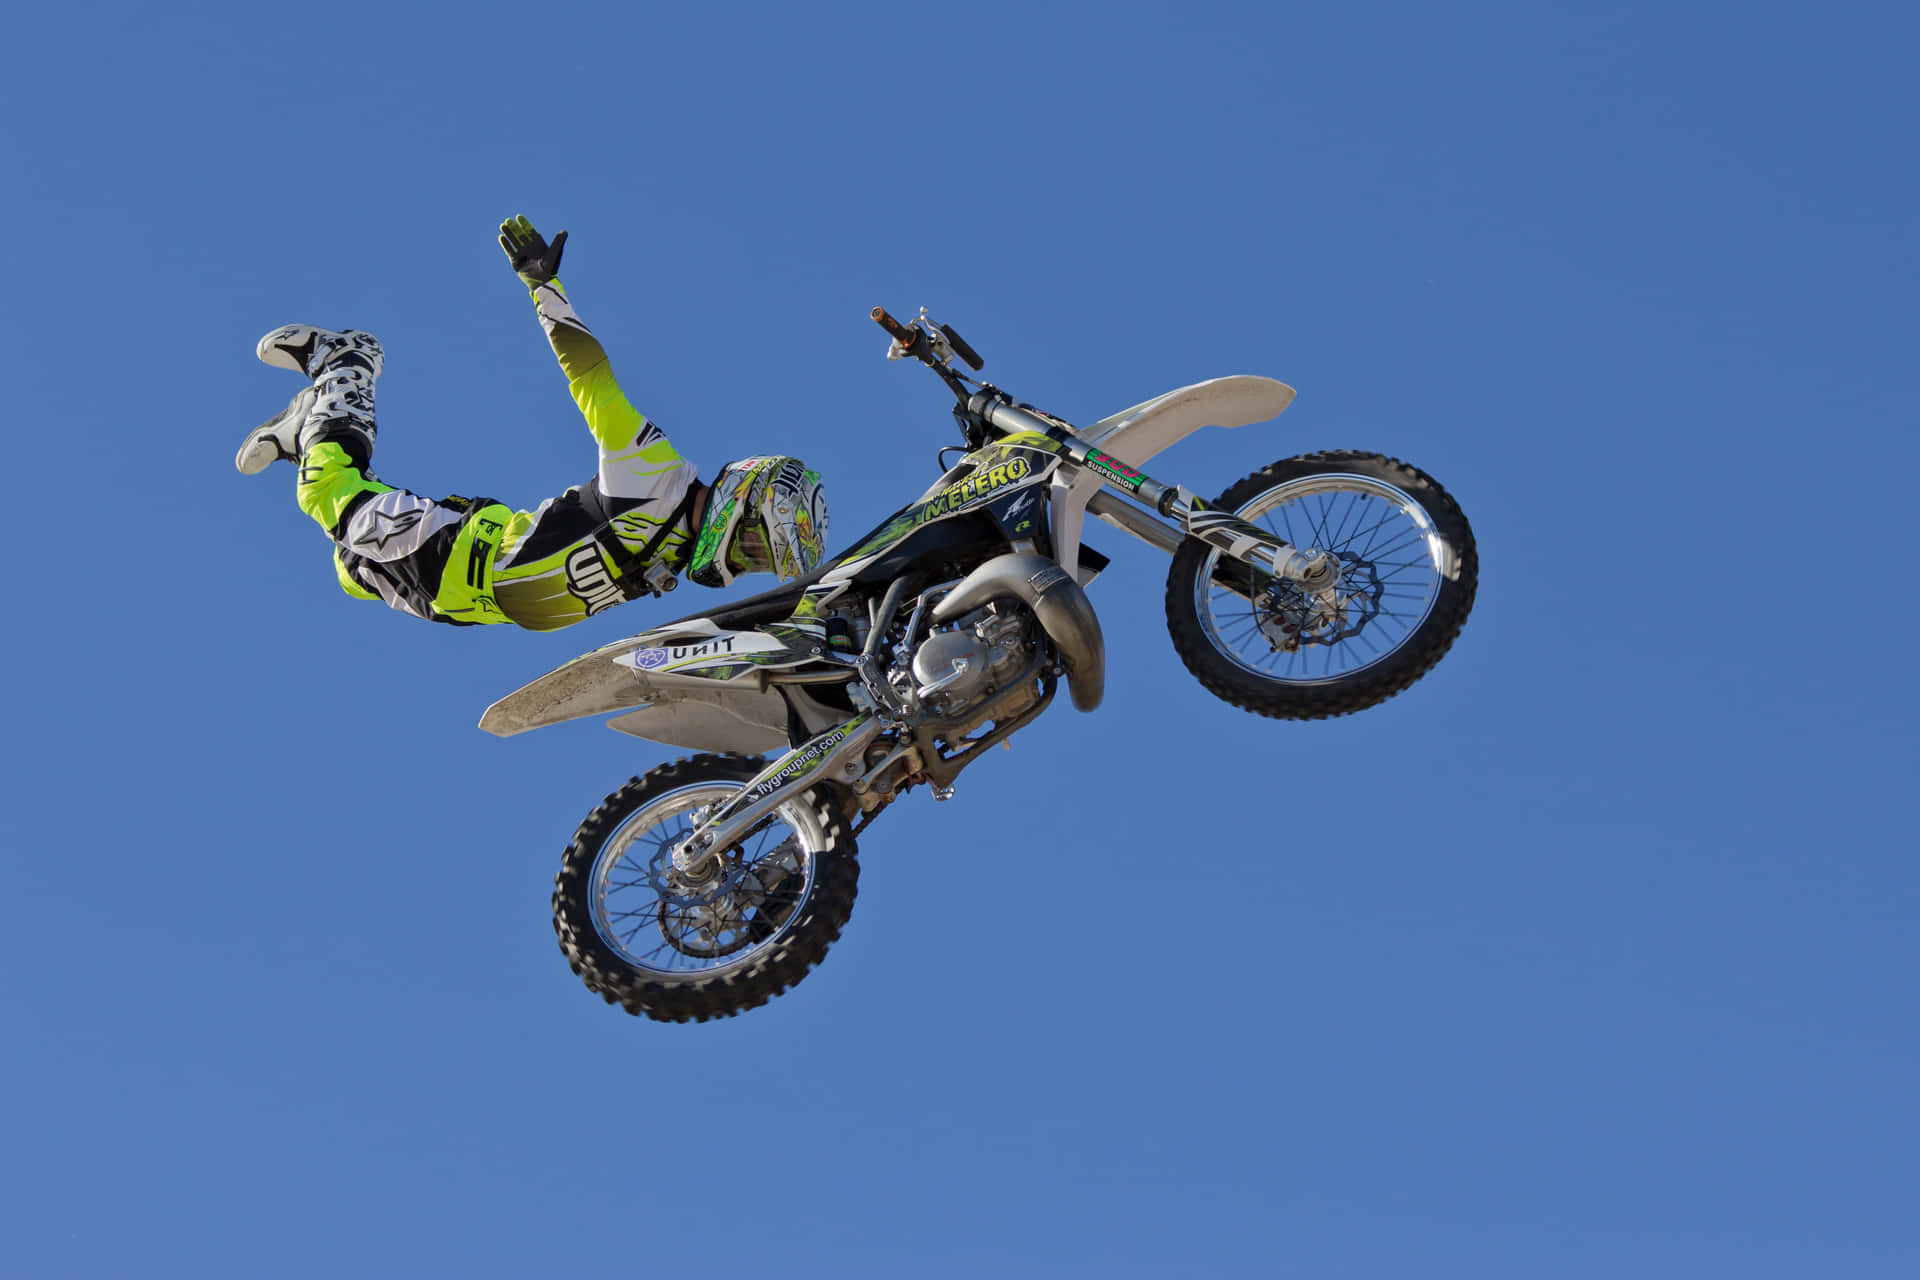 A Person Doing A Trick On A Dirt Bike